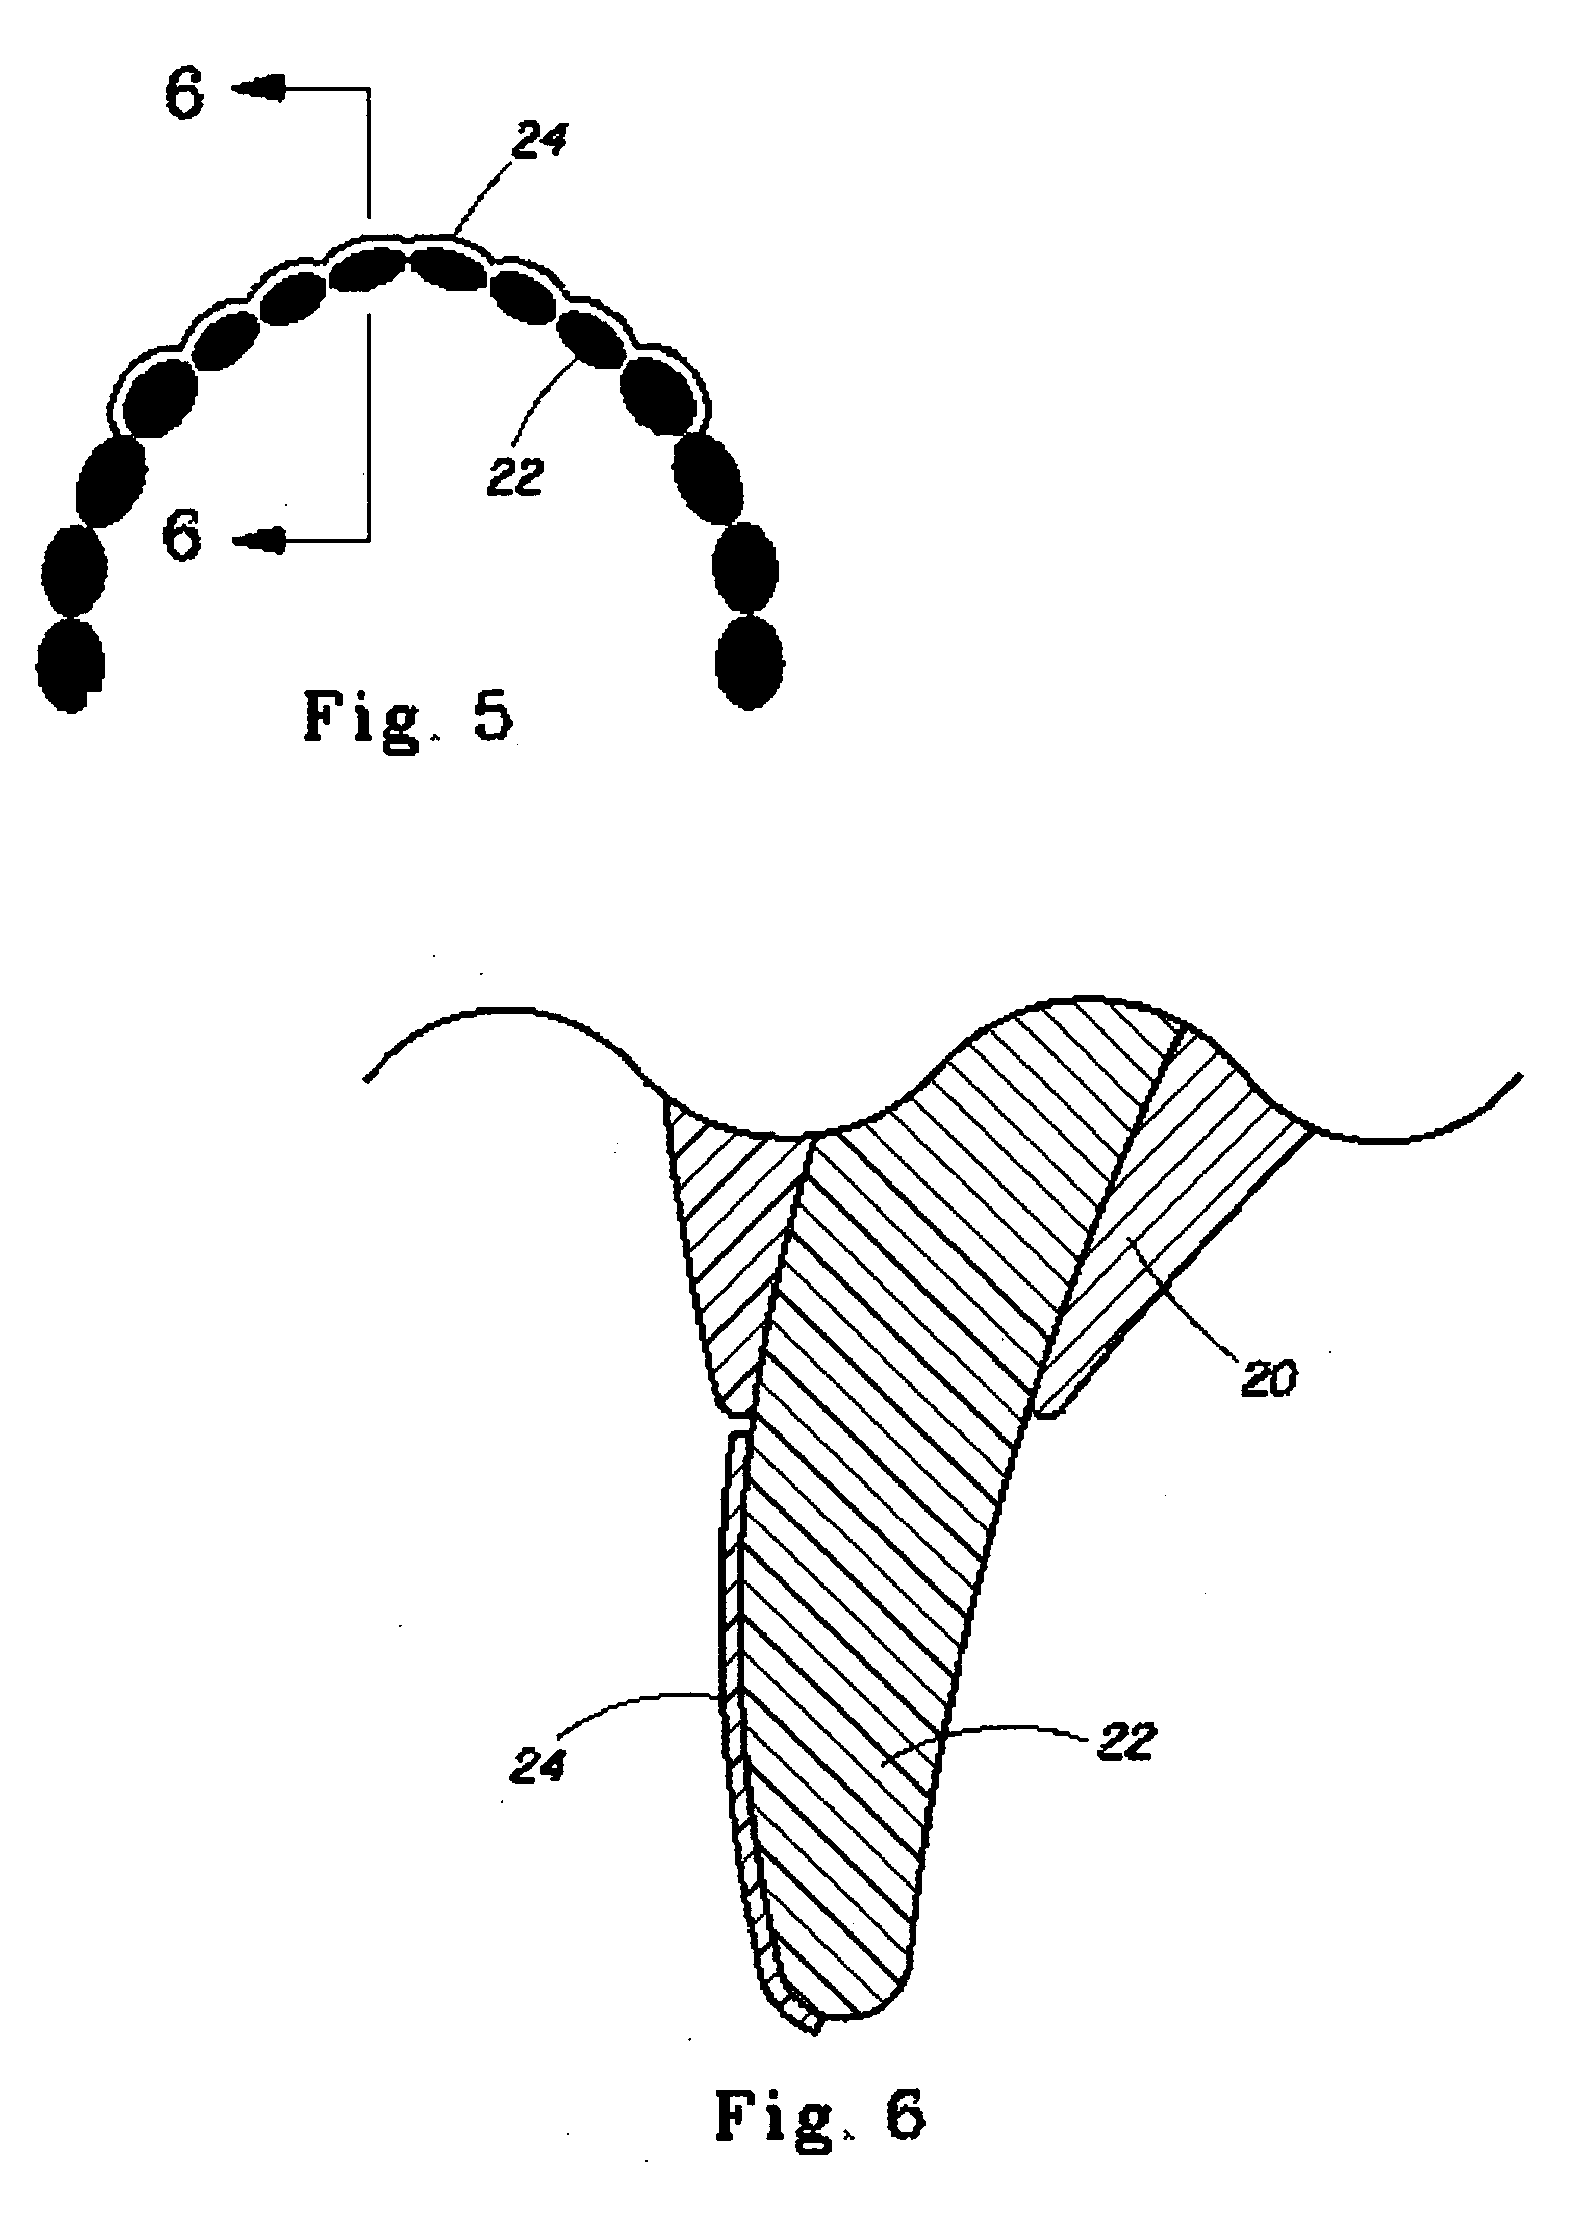 Emulsion composition for delivery of bleaching agents to teeth